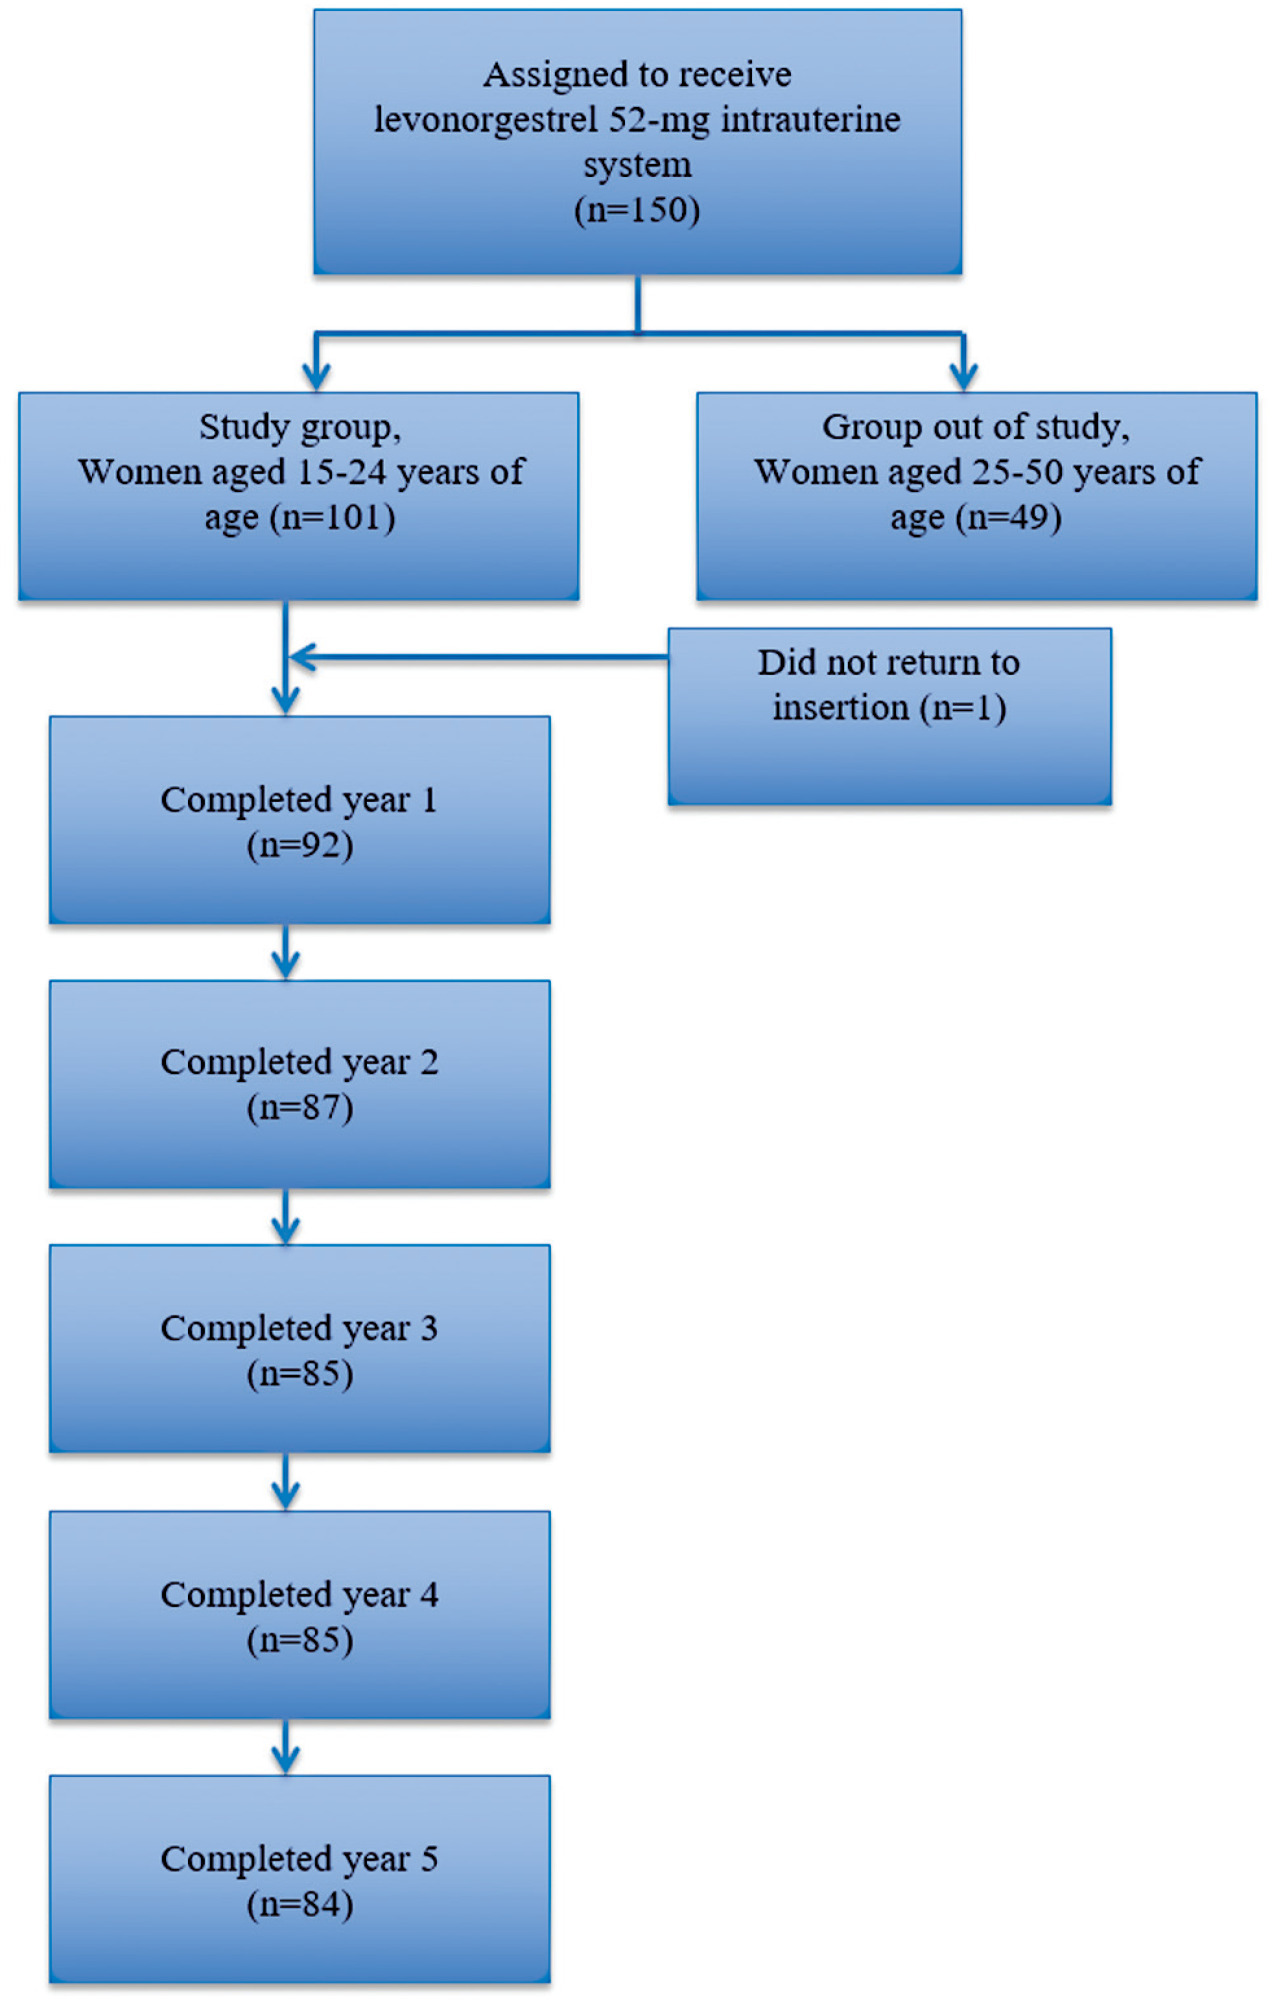 Five-year Contraceptive Use of 52-mg Levonorgestrel Releasing Intrauterine System in Young Women, Menstrual Patterns, and New Contraceptive Choice